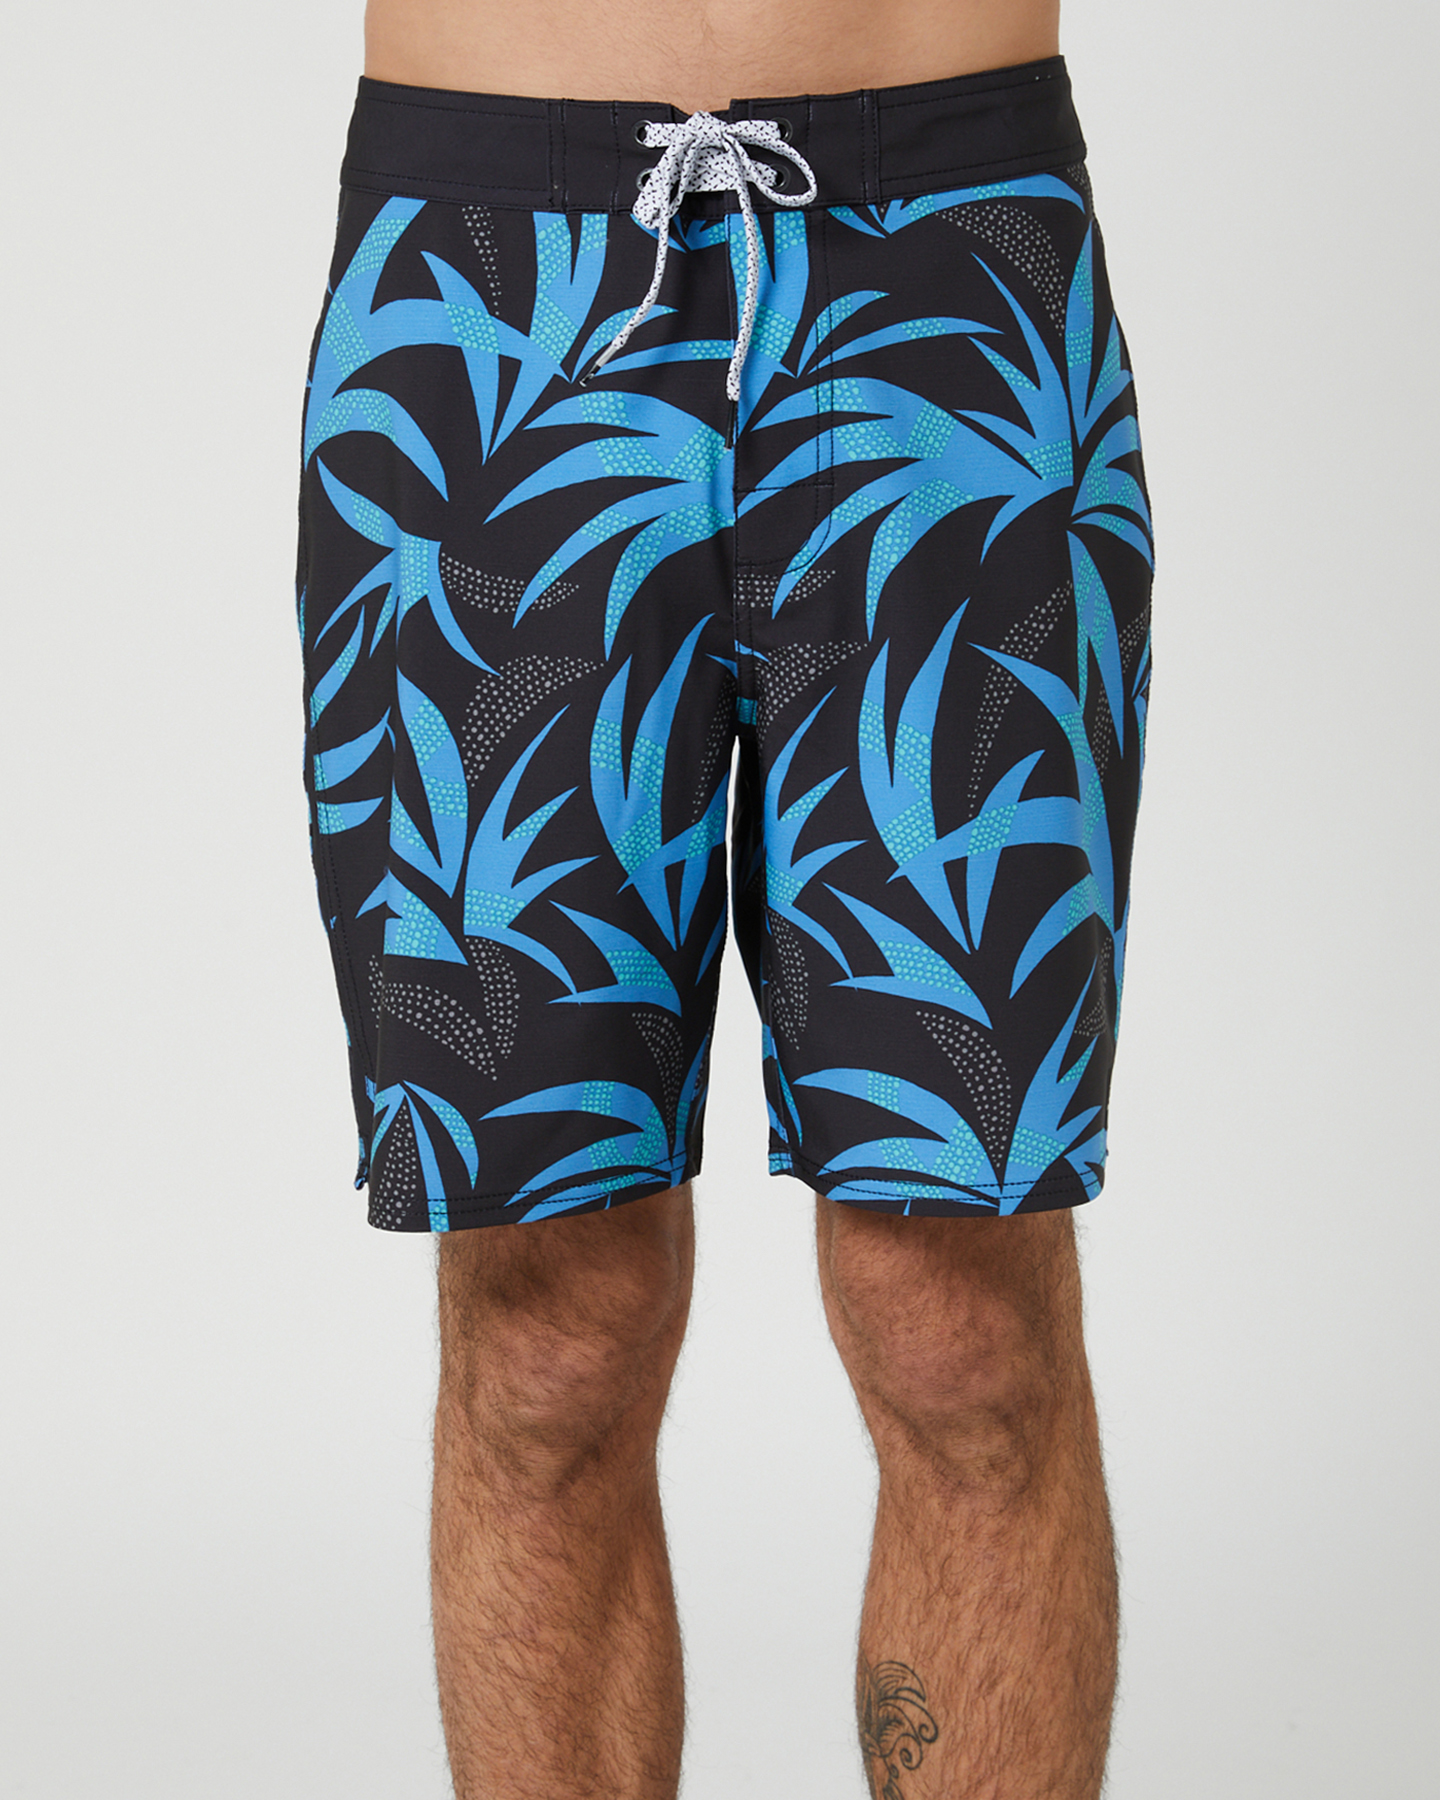 Rip Curl Mirage Angourie Floral Mens Boardshort - Black | SurfStitch